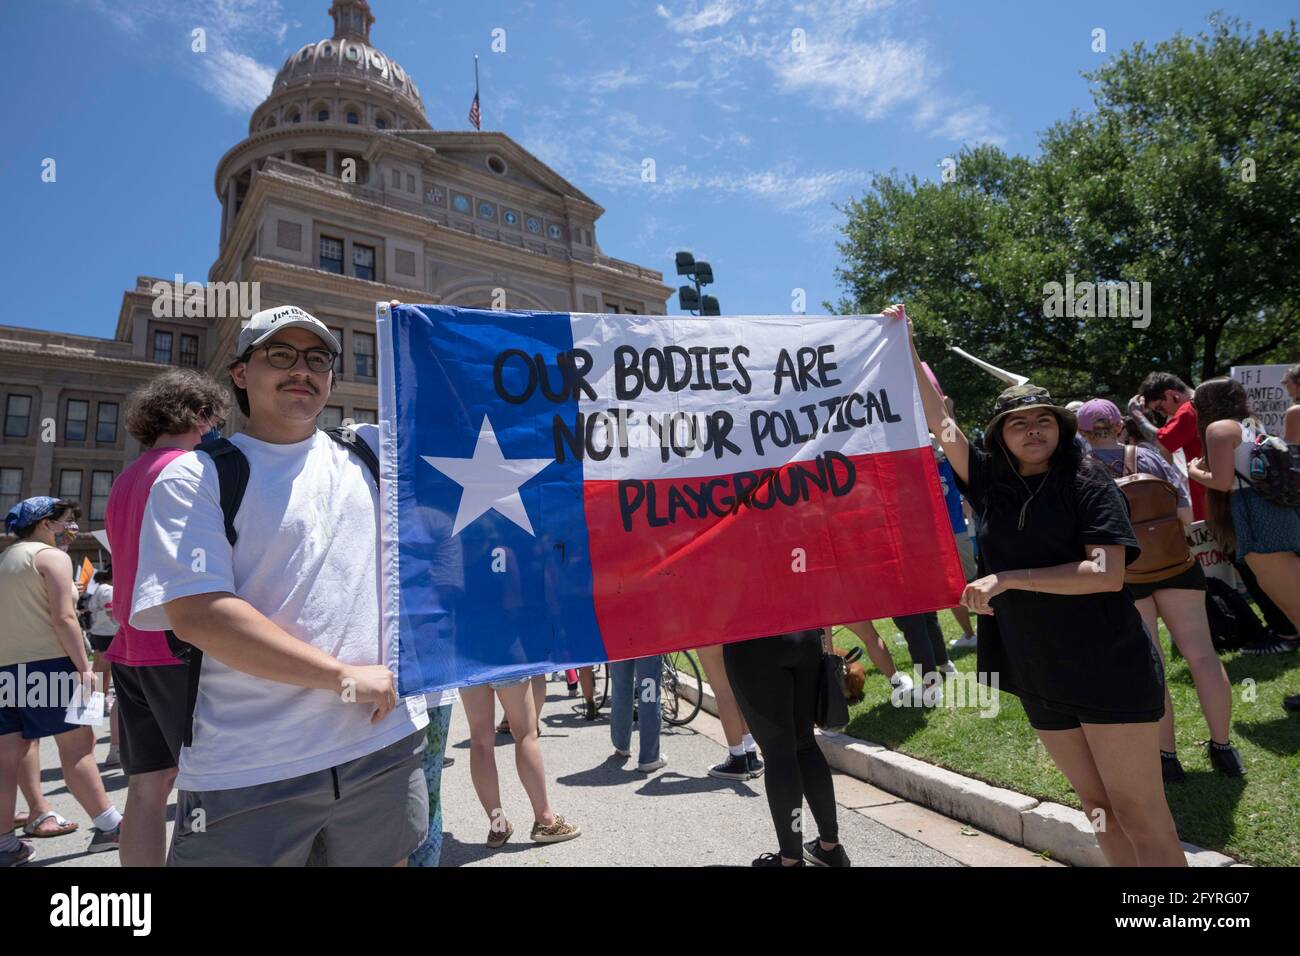 Austin, Texas, USA. 29th May, 2021. Several hundred Texans rally at the State Capitol in Austin protesting recently enacted legislation by Governor Greg Abbott that severely restrictions access to legal abortions. The law outlaws abortion procedures after detection of a heartbeat, generally six weeks after conception, or about the time a woman is aware of a pregnancy. Credit: Bob Daemmrich/Alamy Live News Stock Photo